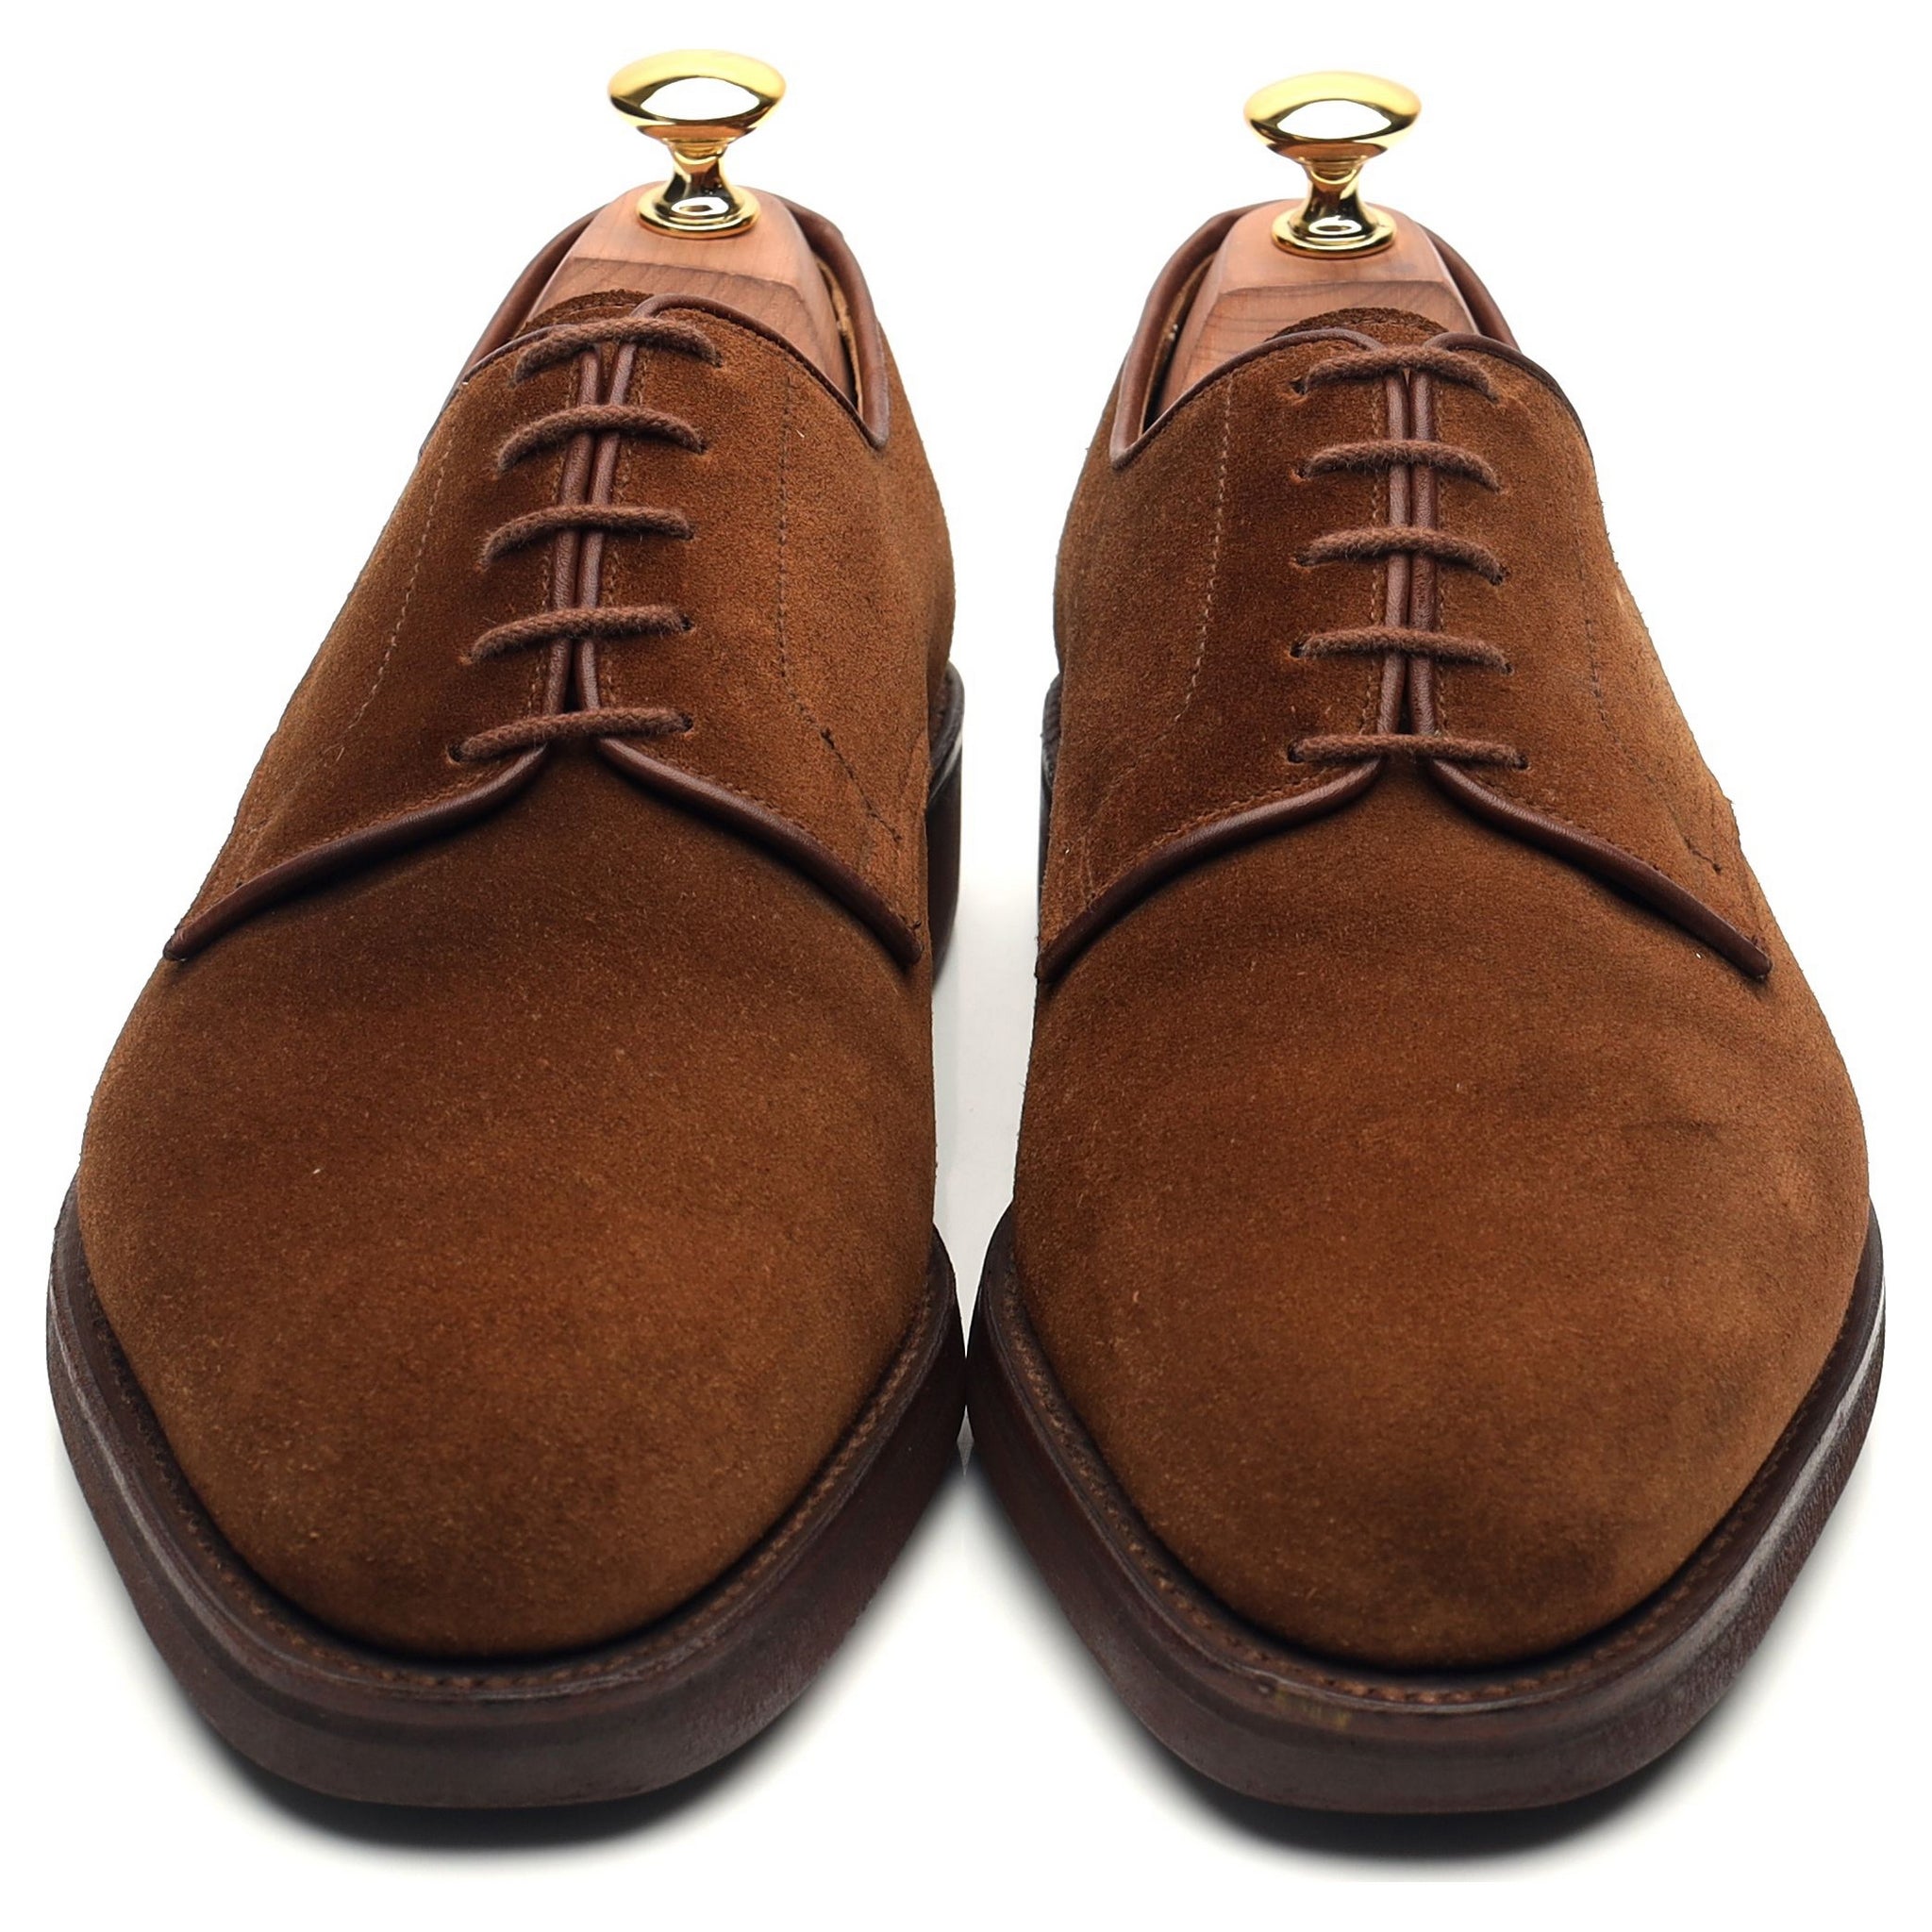 Latimer' Tan Brown Suede Derby UK 6 G - Abbot's Shoes